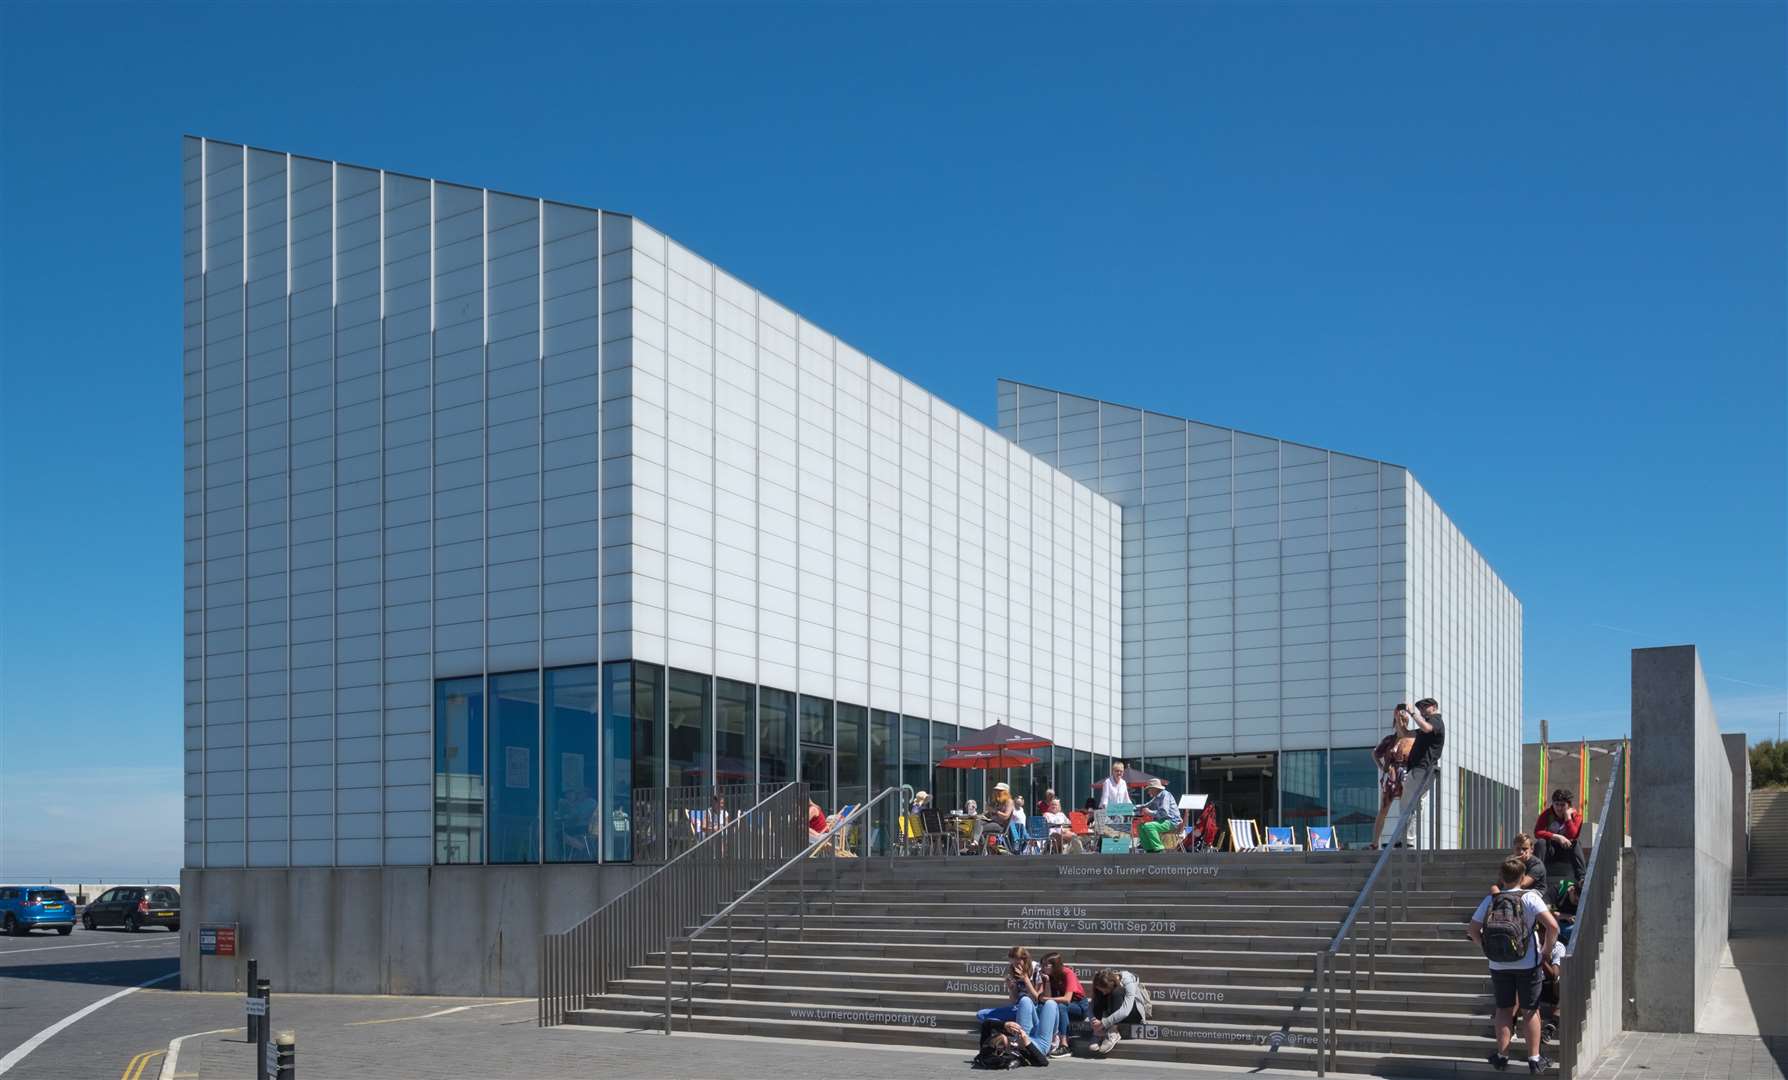 Turner Contemporary will host the Turner Prize